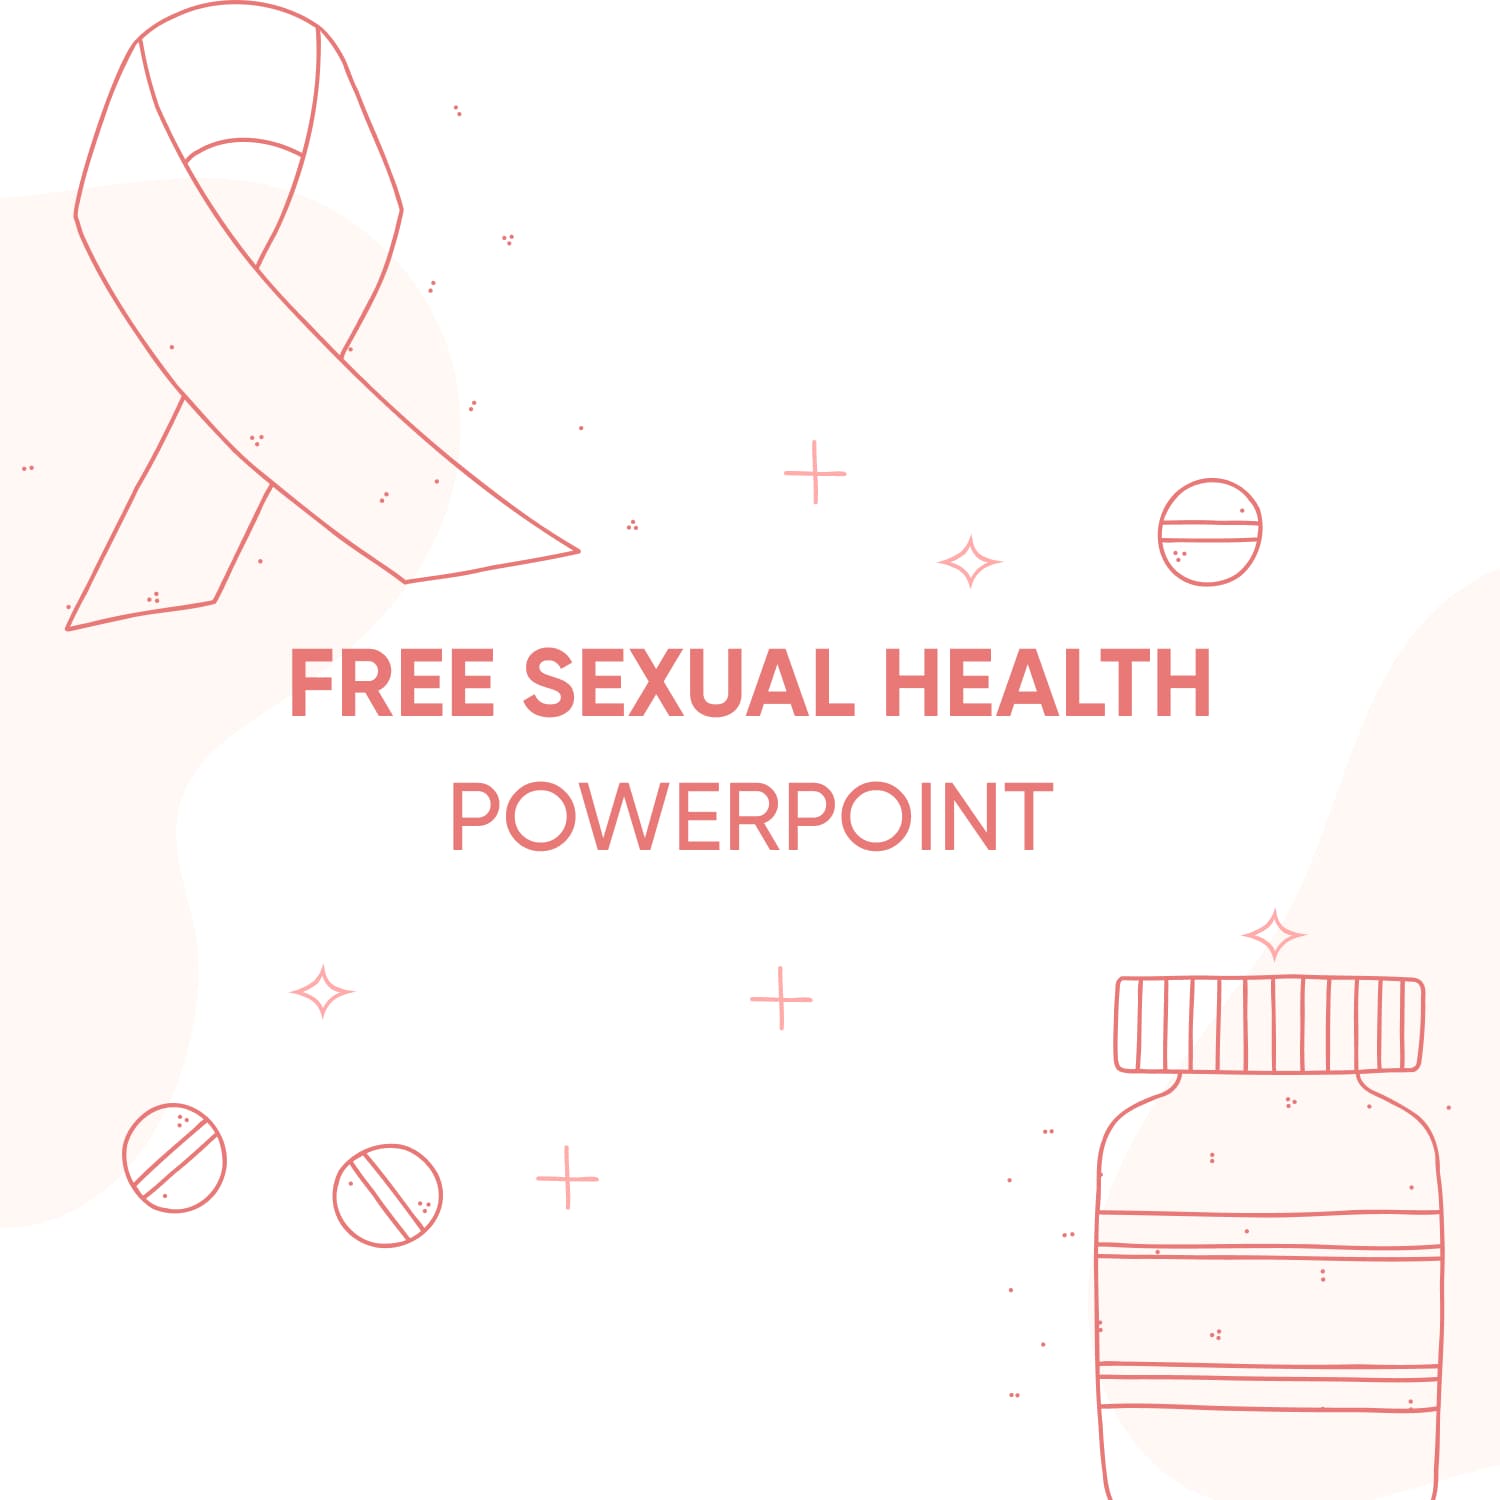 Images with Sexual Health Powerpoint..